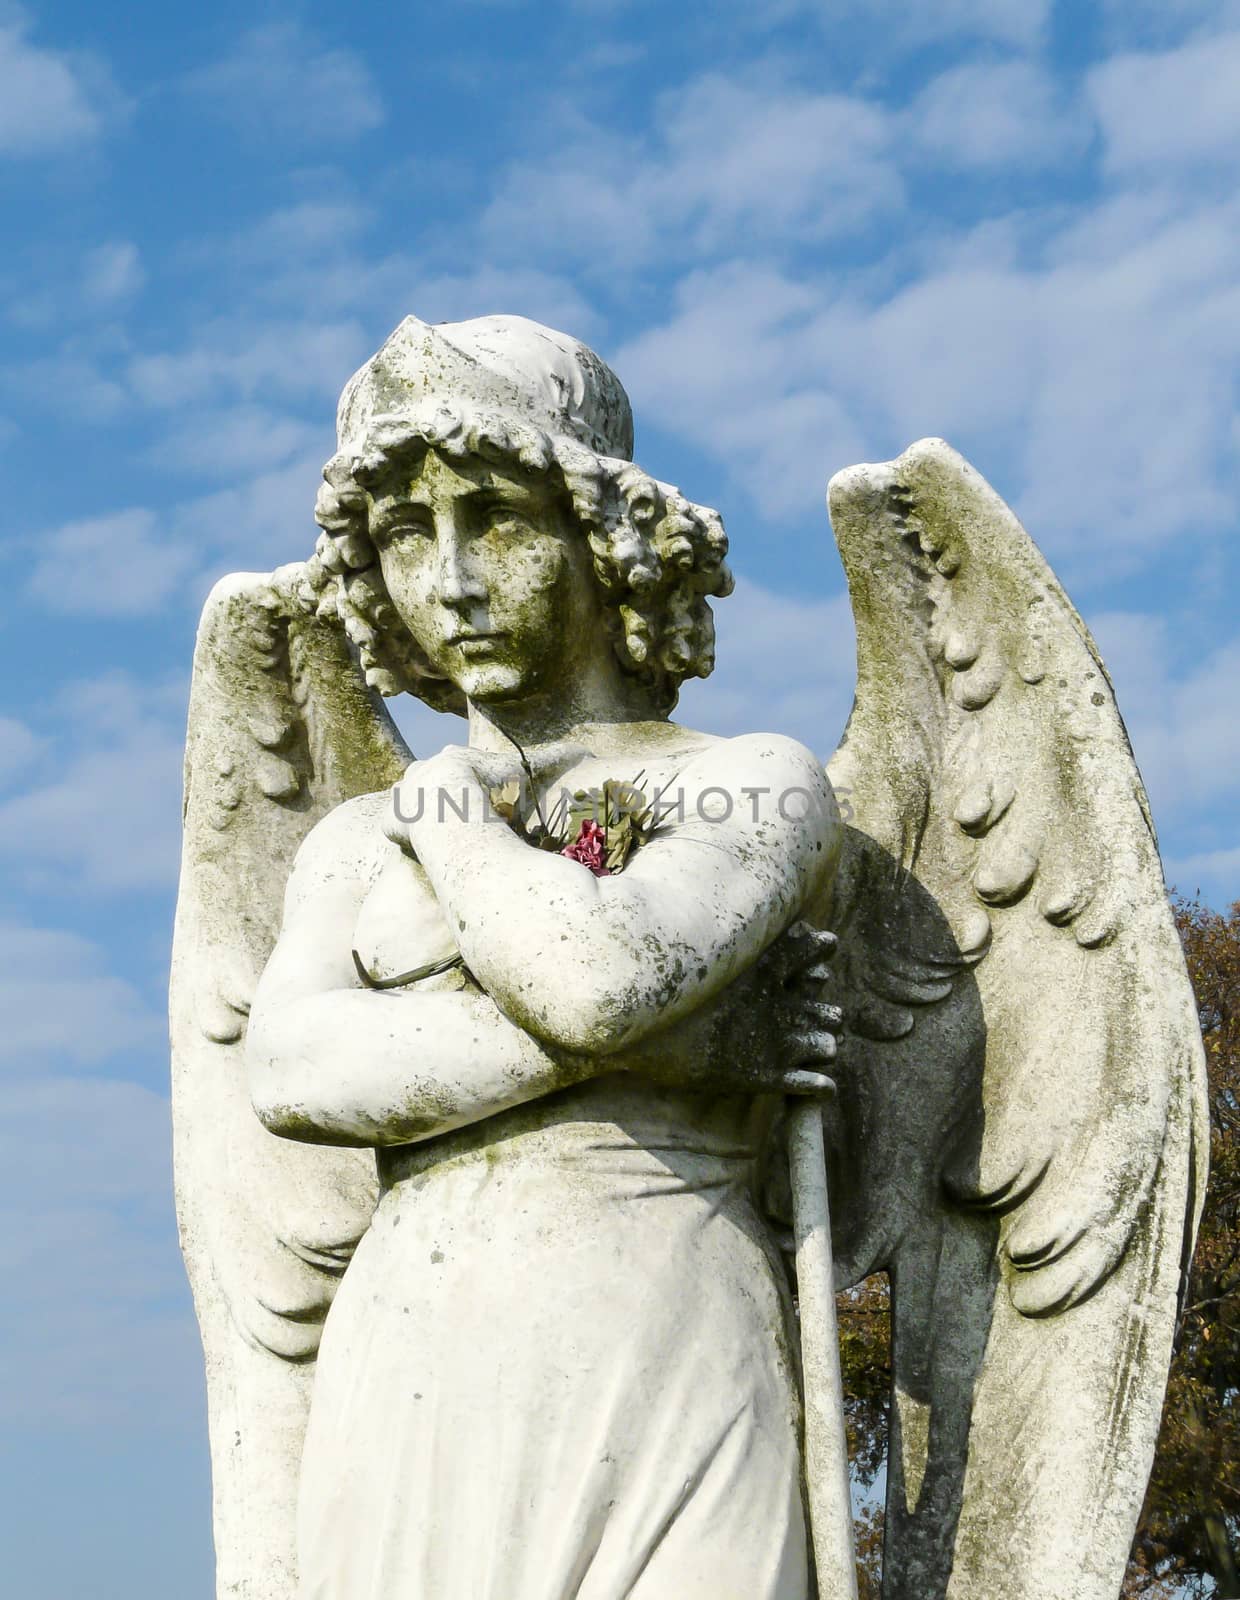 Beautiful, thoughtful angel with flowers